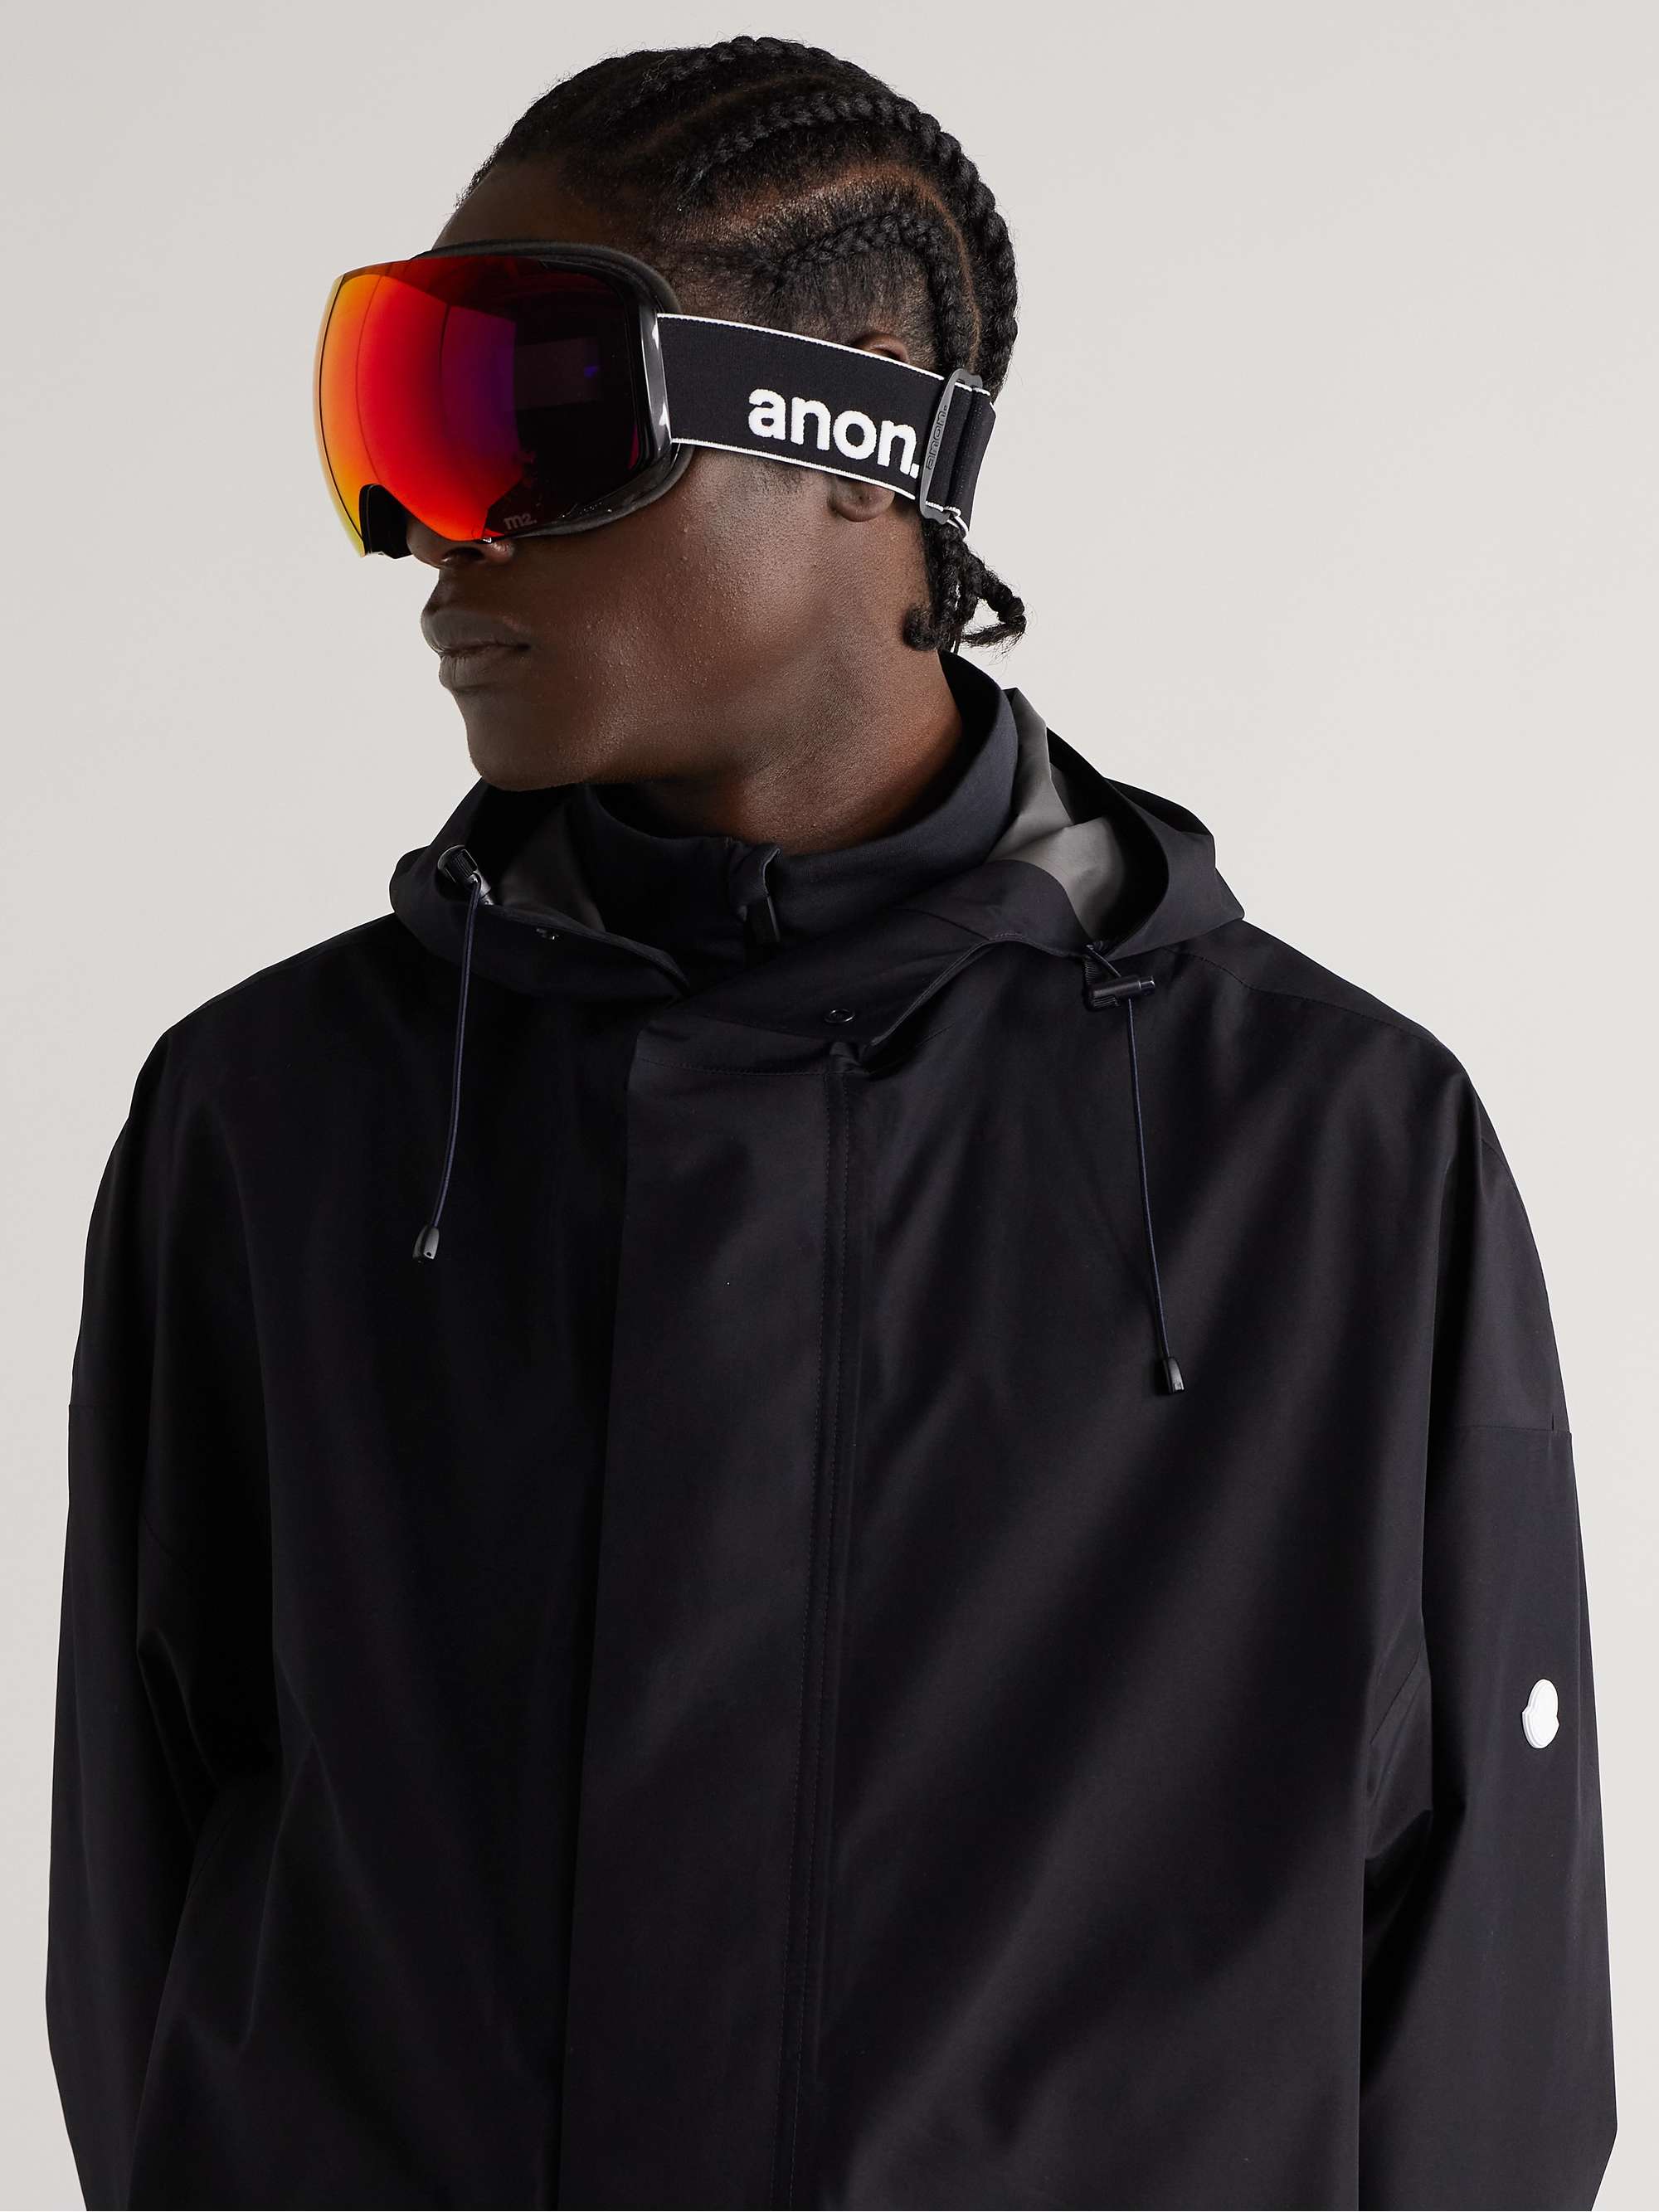 ANON M2 Ski Goggles and Stretch-Jersey Face Mask | MR PORTER